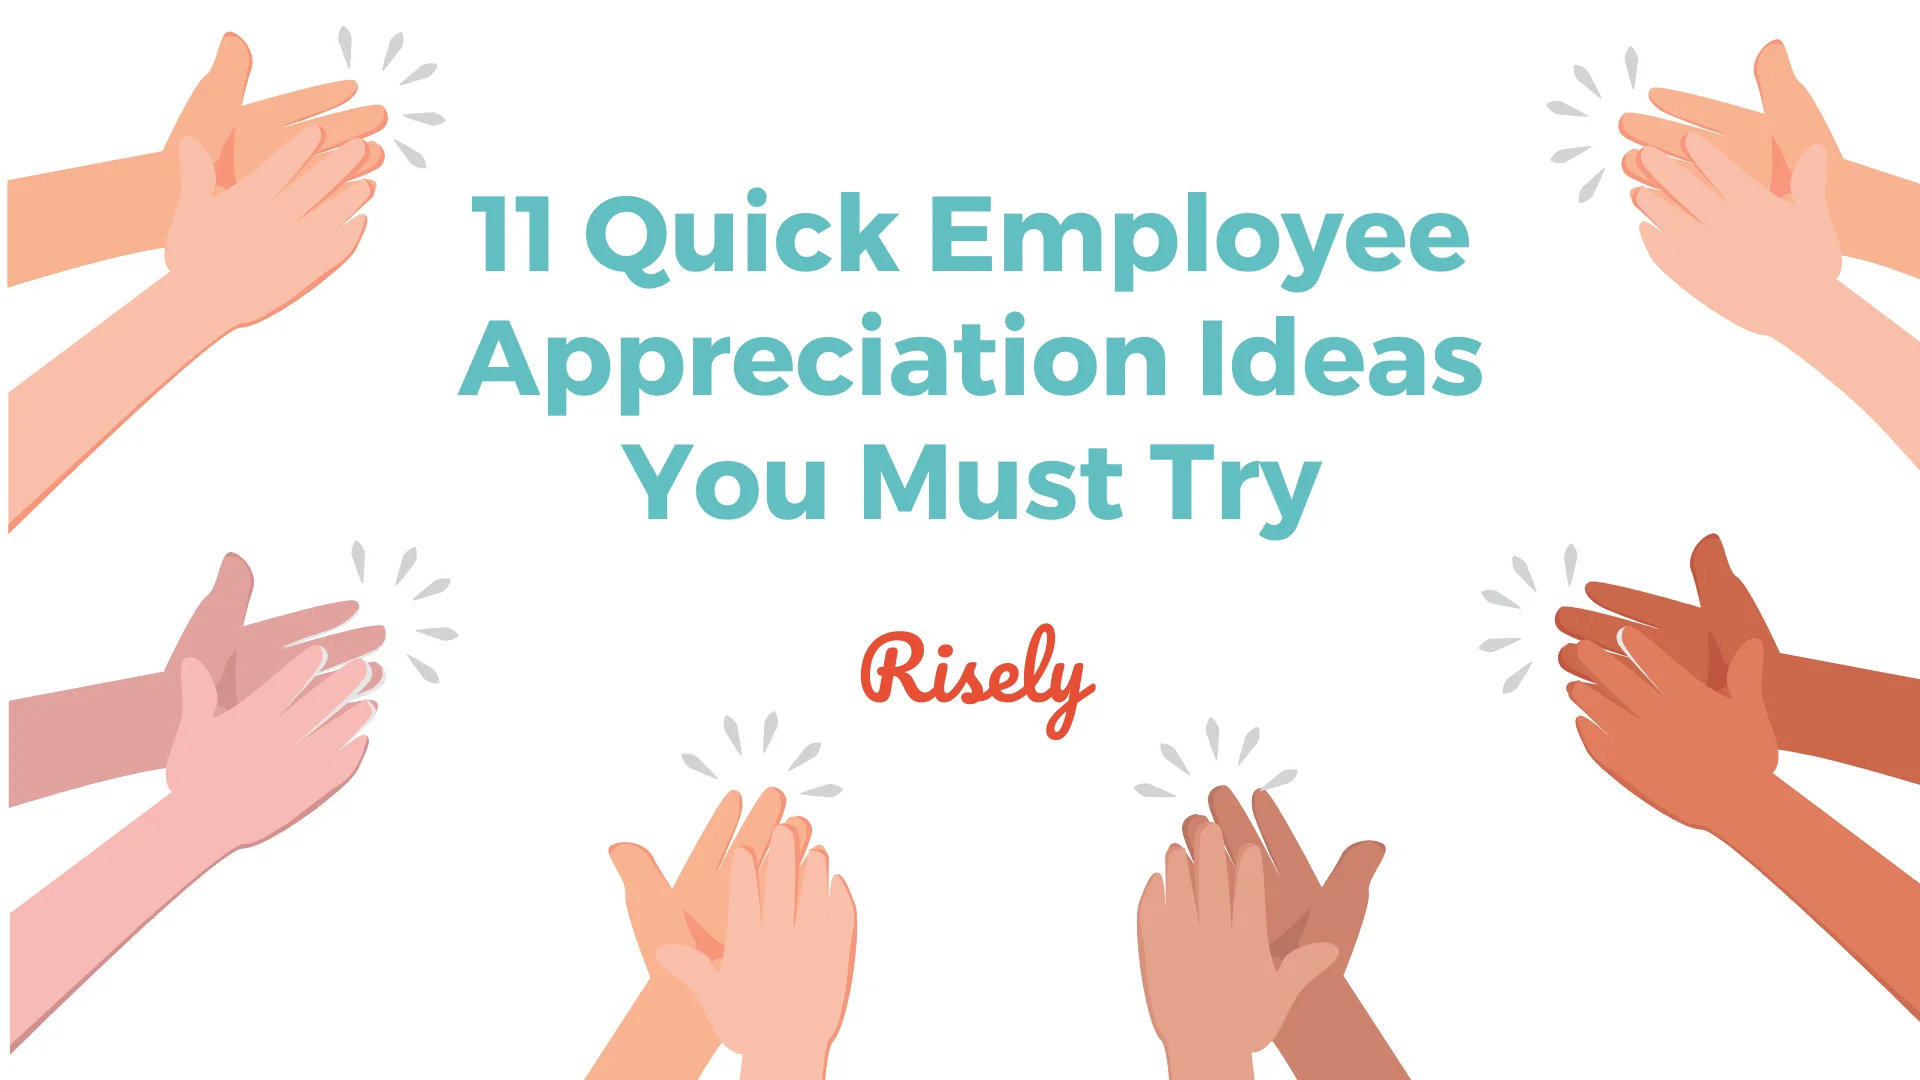 11 Quick Employee Appreciation Ideas You Must Try